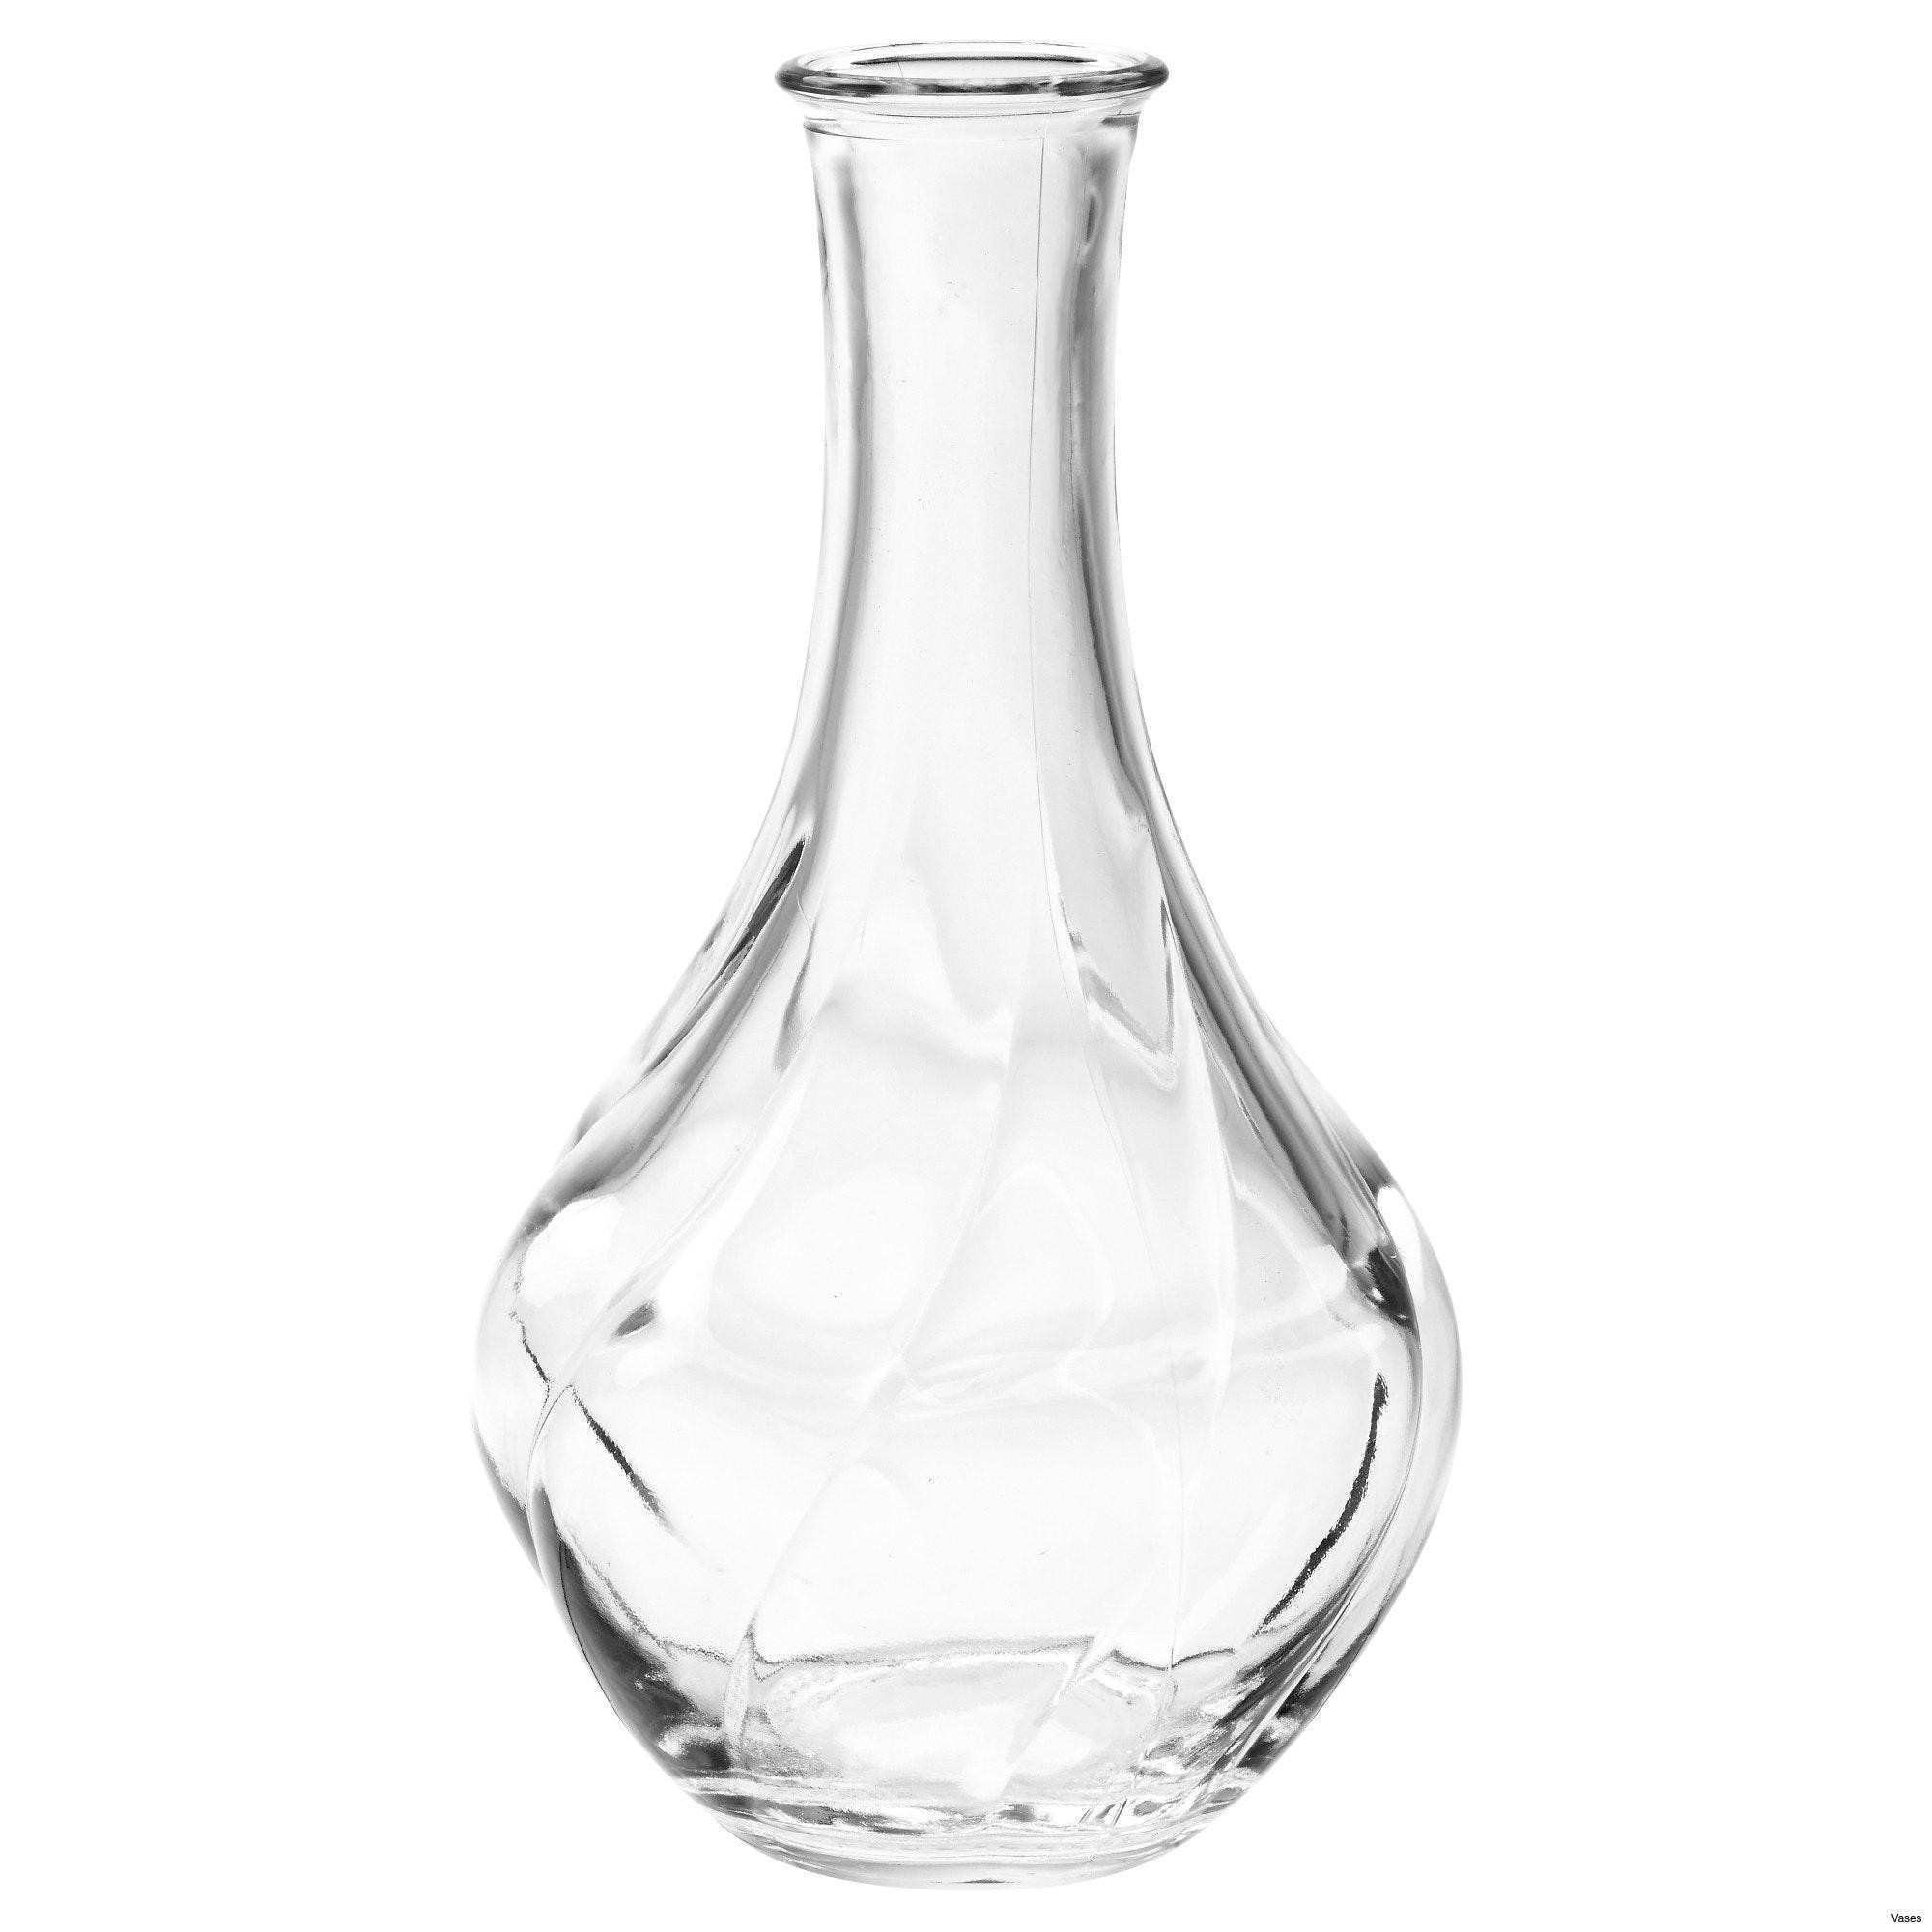 19 Awesome Set Of Small Glass Vases 2024 free download set of small glass vases of small glass vase photos vases floating candle vase set glass with small glass vase pics small outdoor lights best living room glass vases fresh clear of small